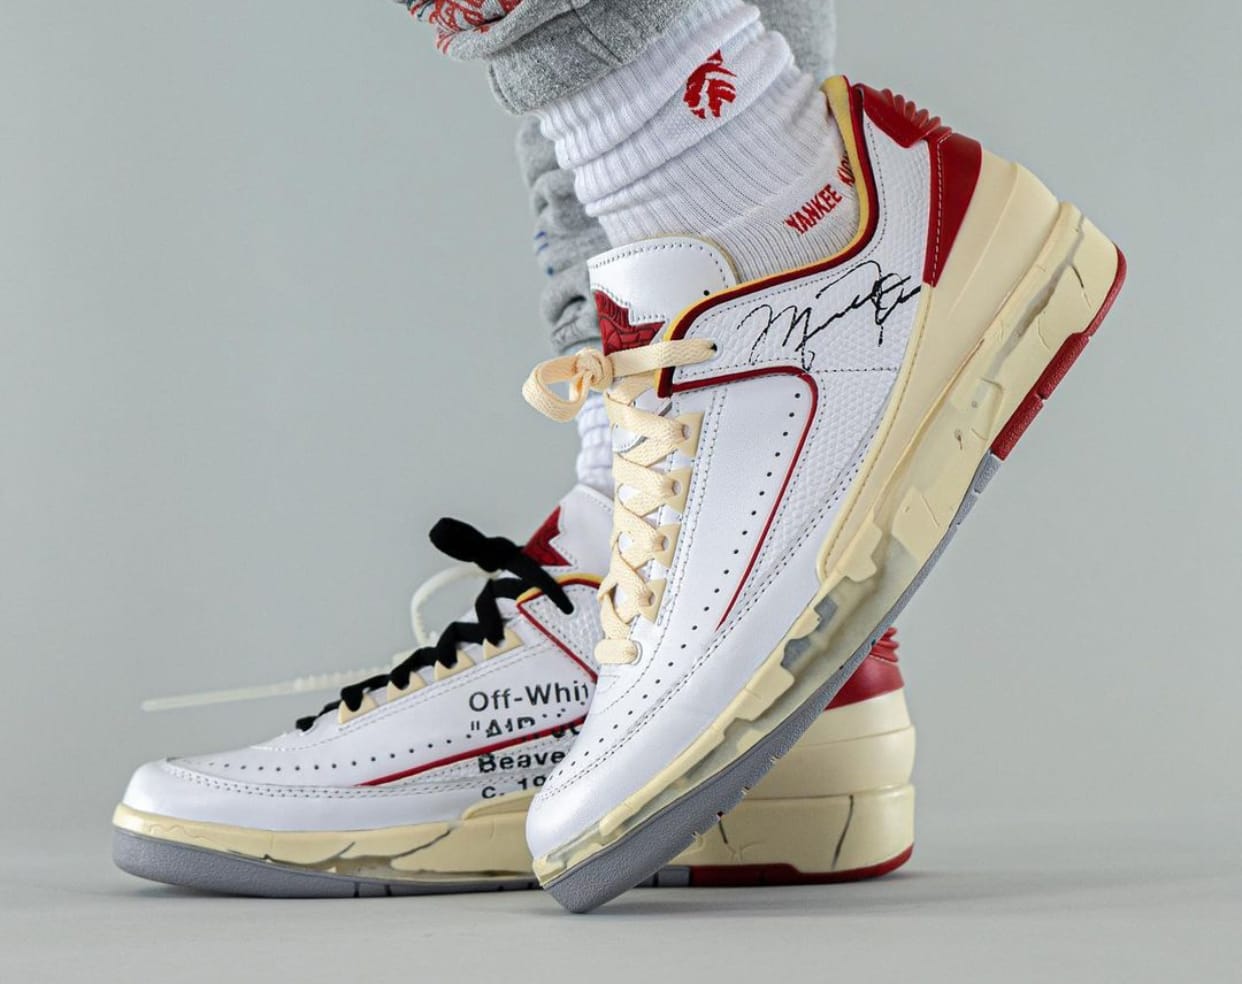 Off-White x Air Jordan 2 Low DJ4375-106 lateral on foot